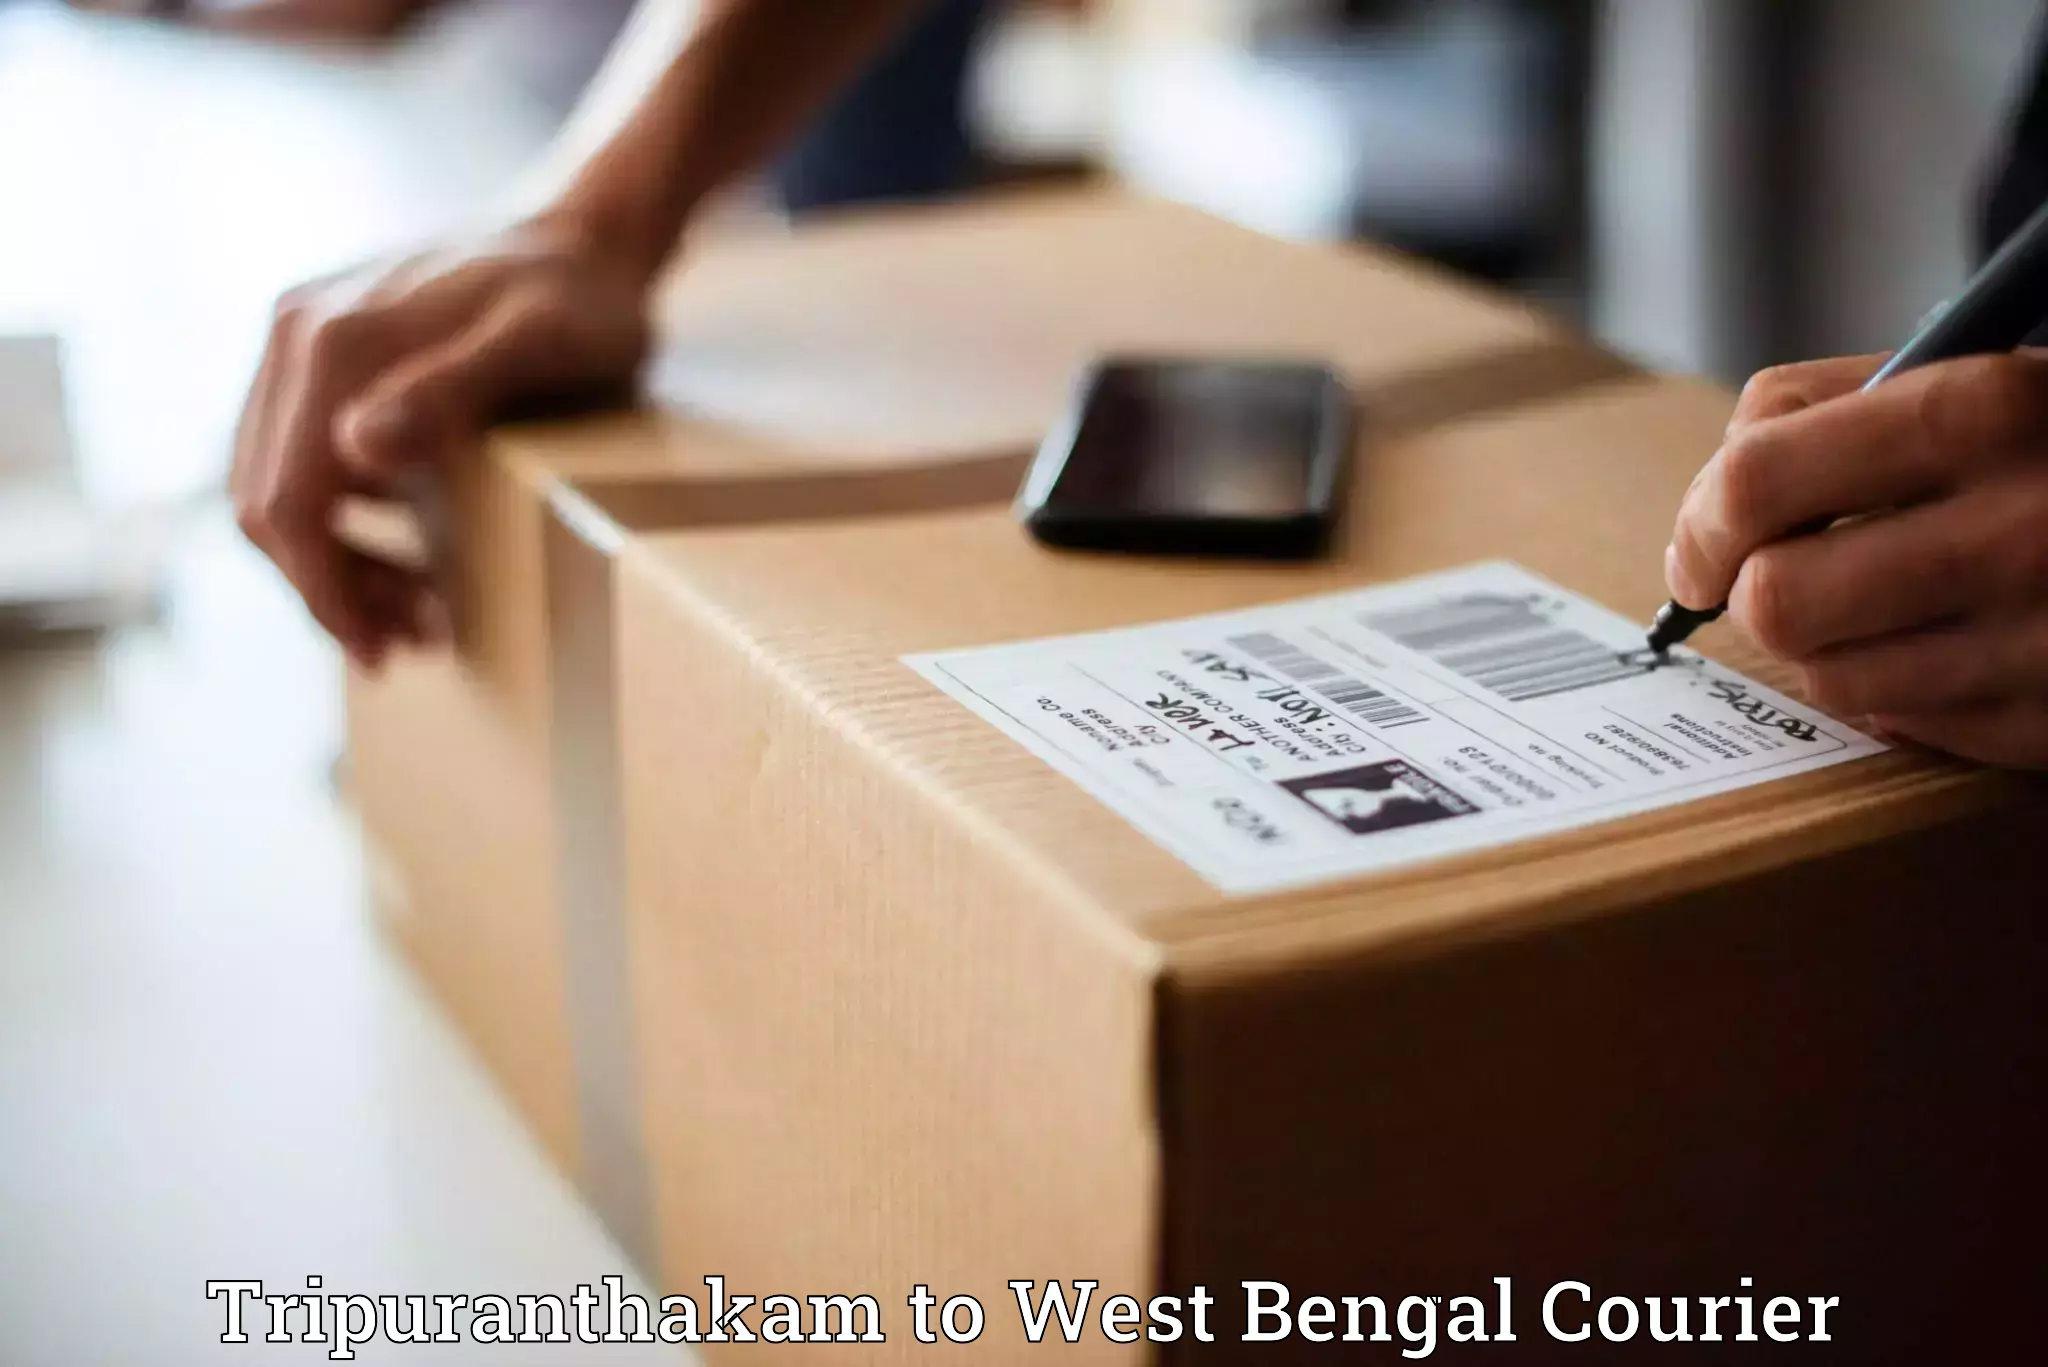 Courier service booking Tripuranthakam to West Bengal